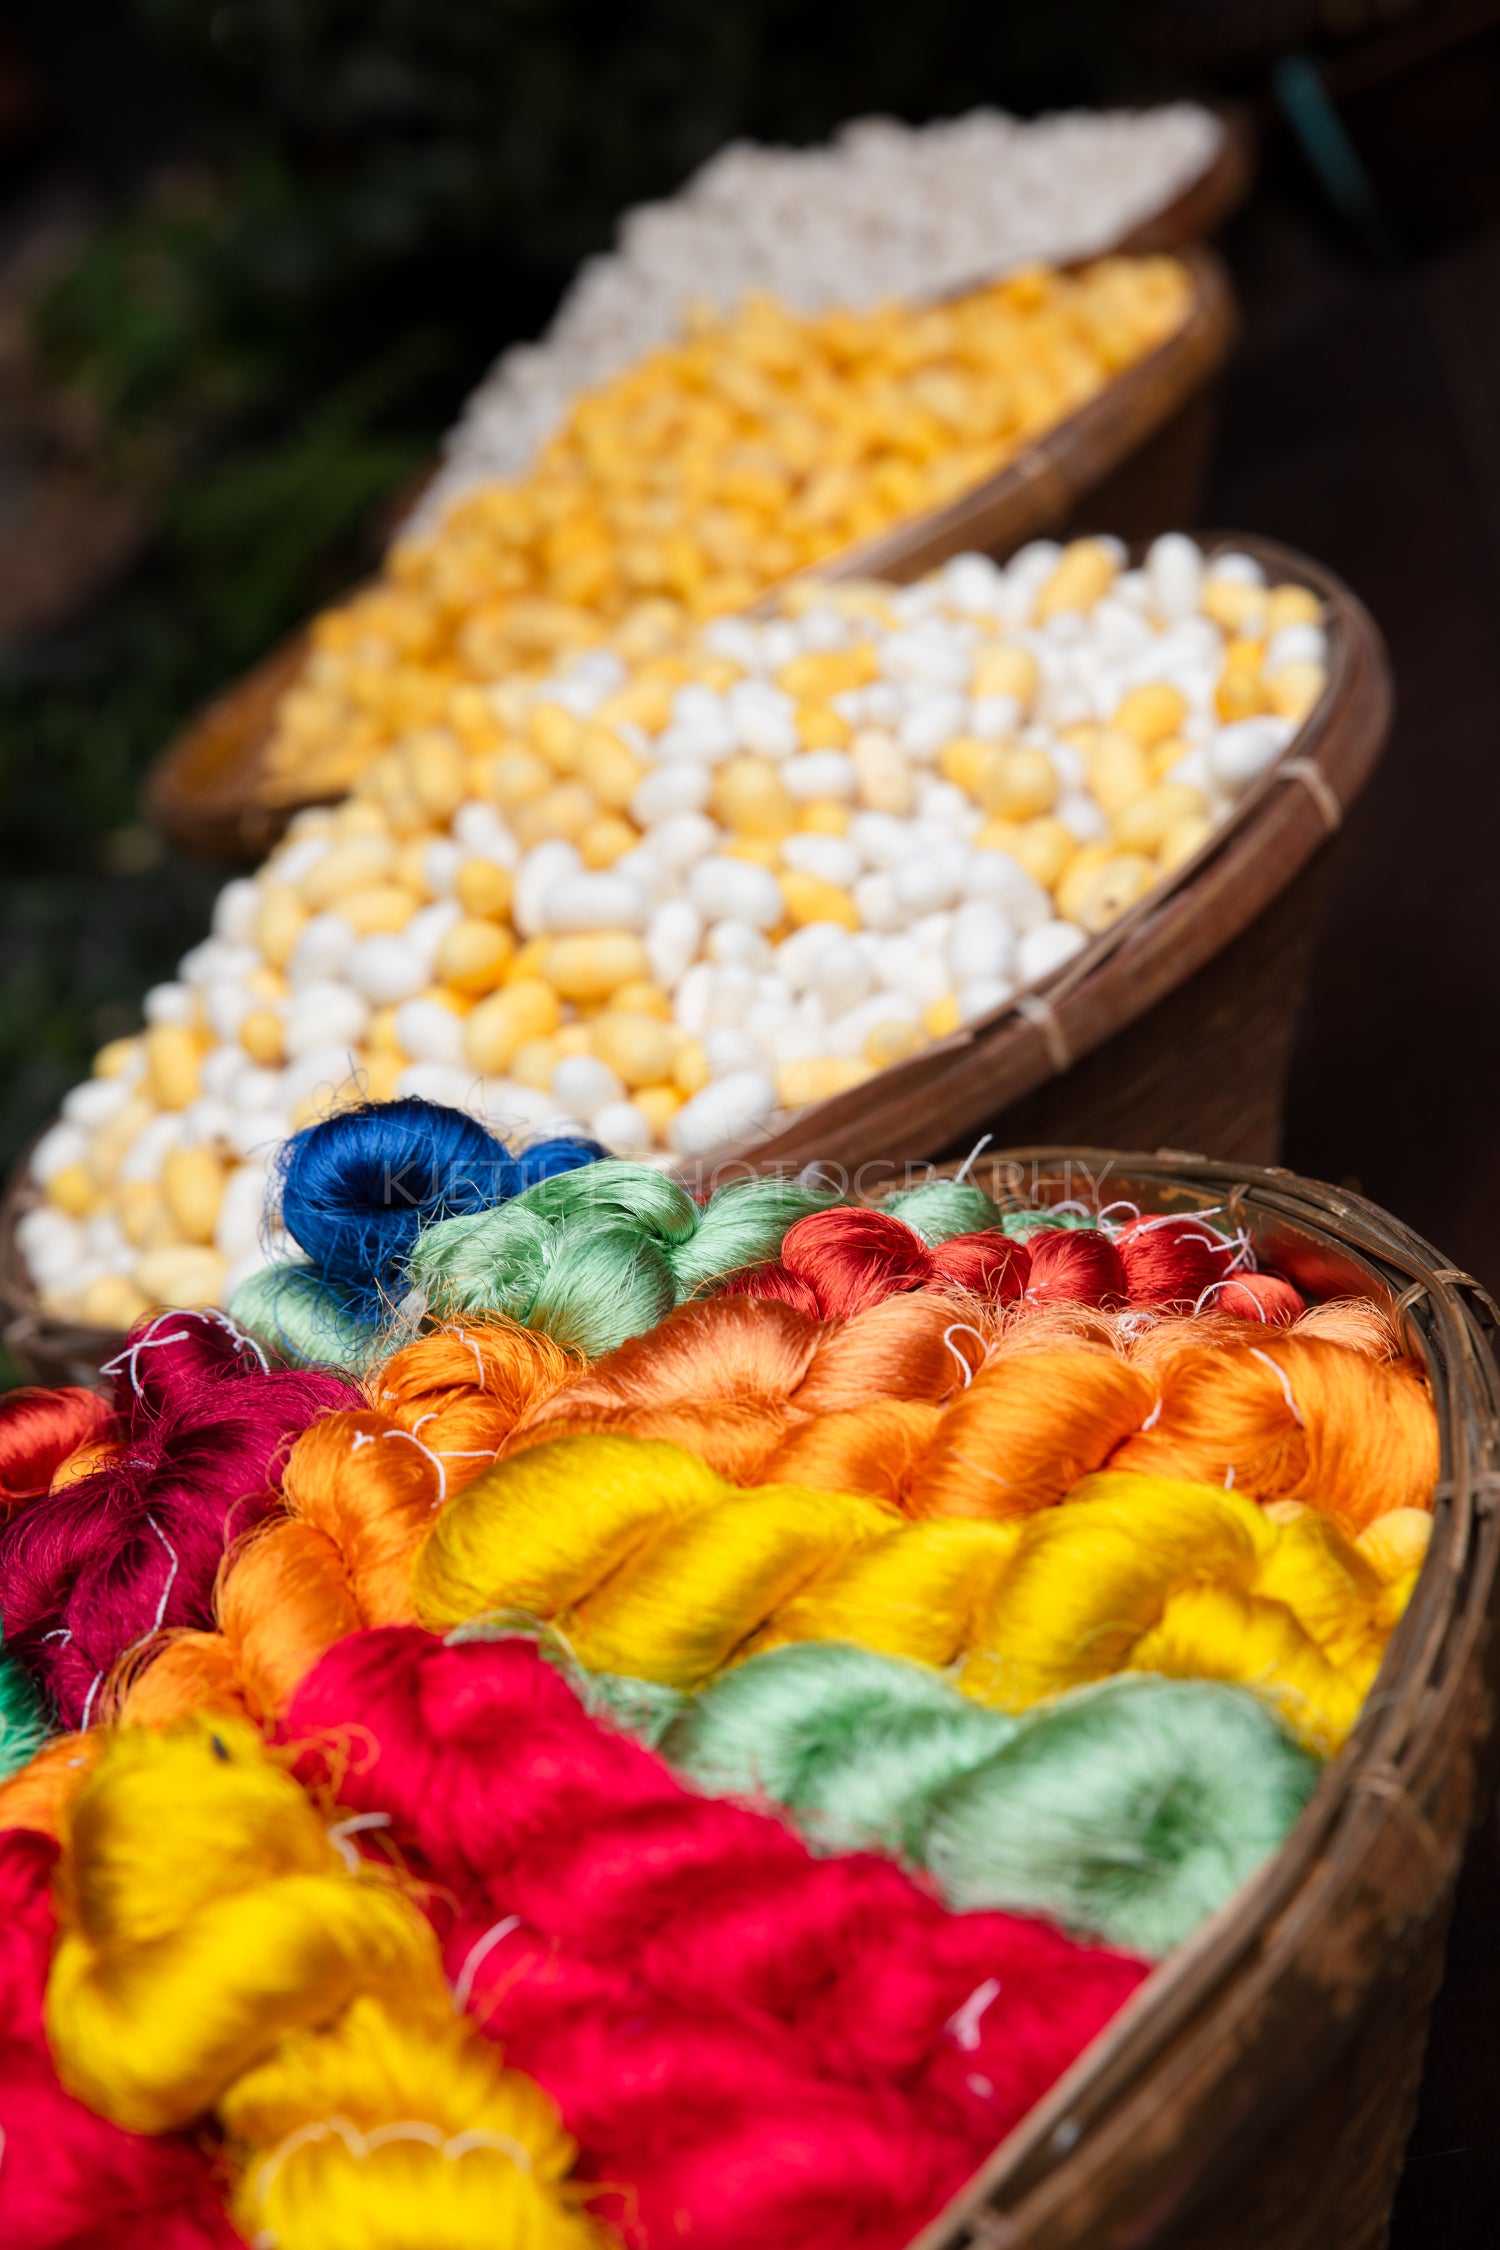 Colorful Thai Silk Threads And Cocoons In Baskets